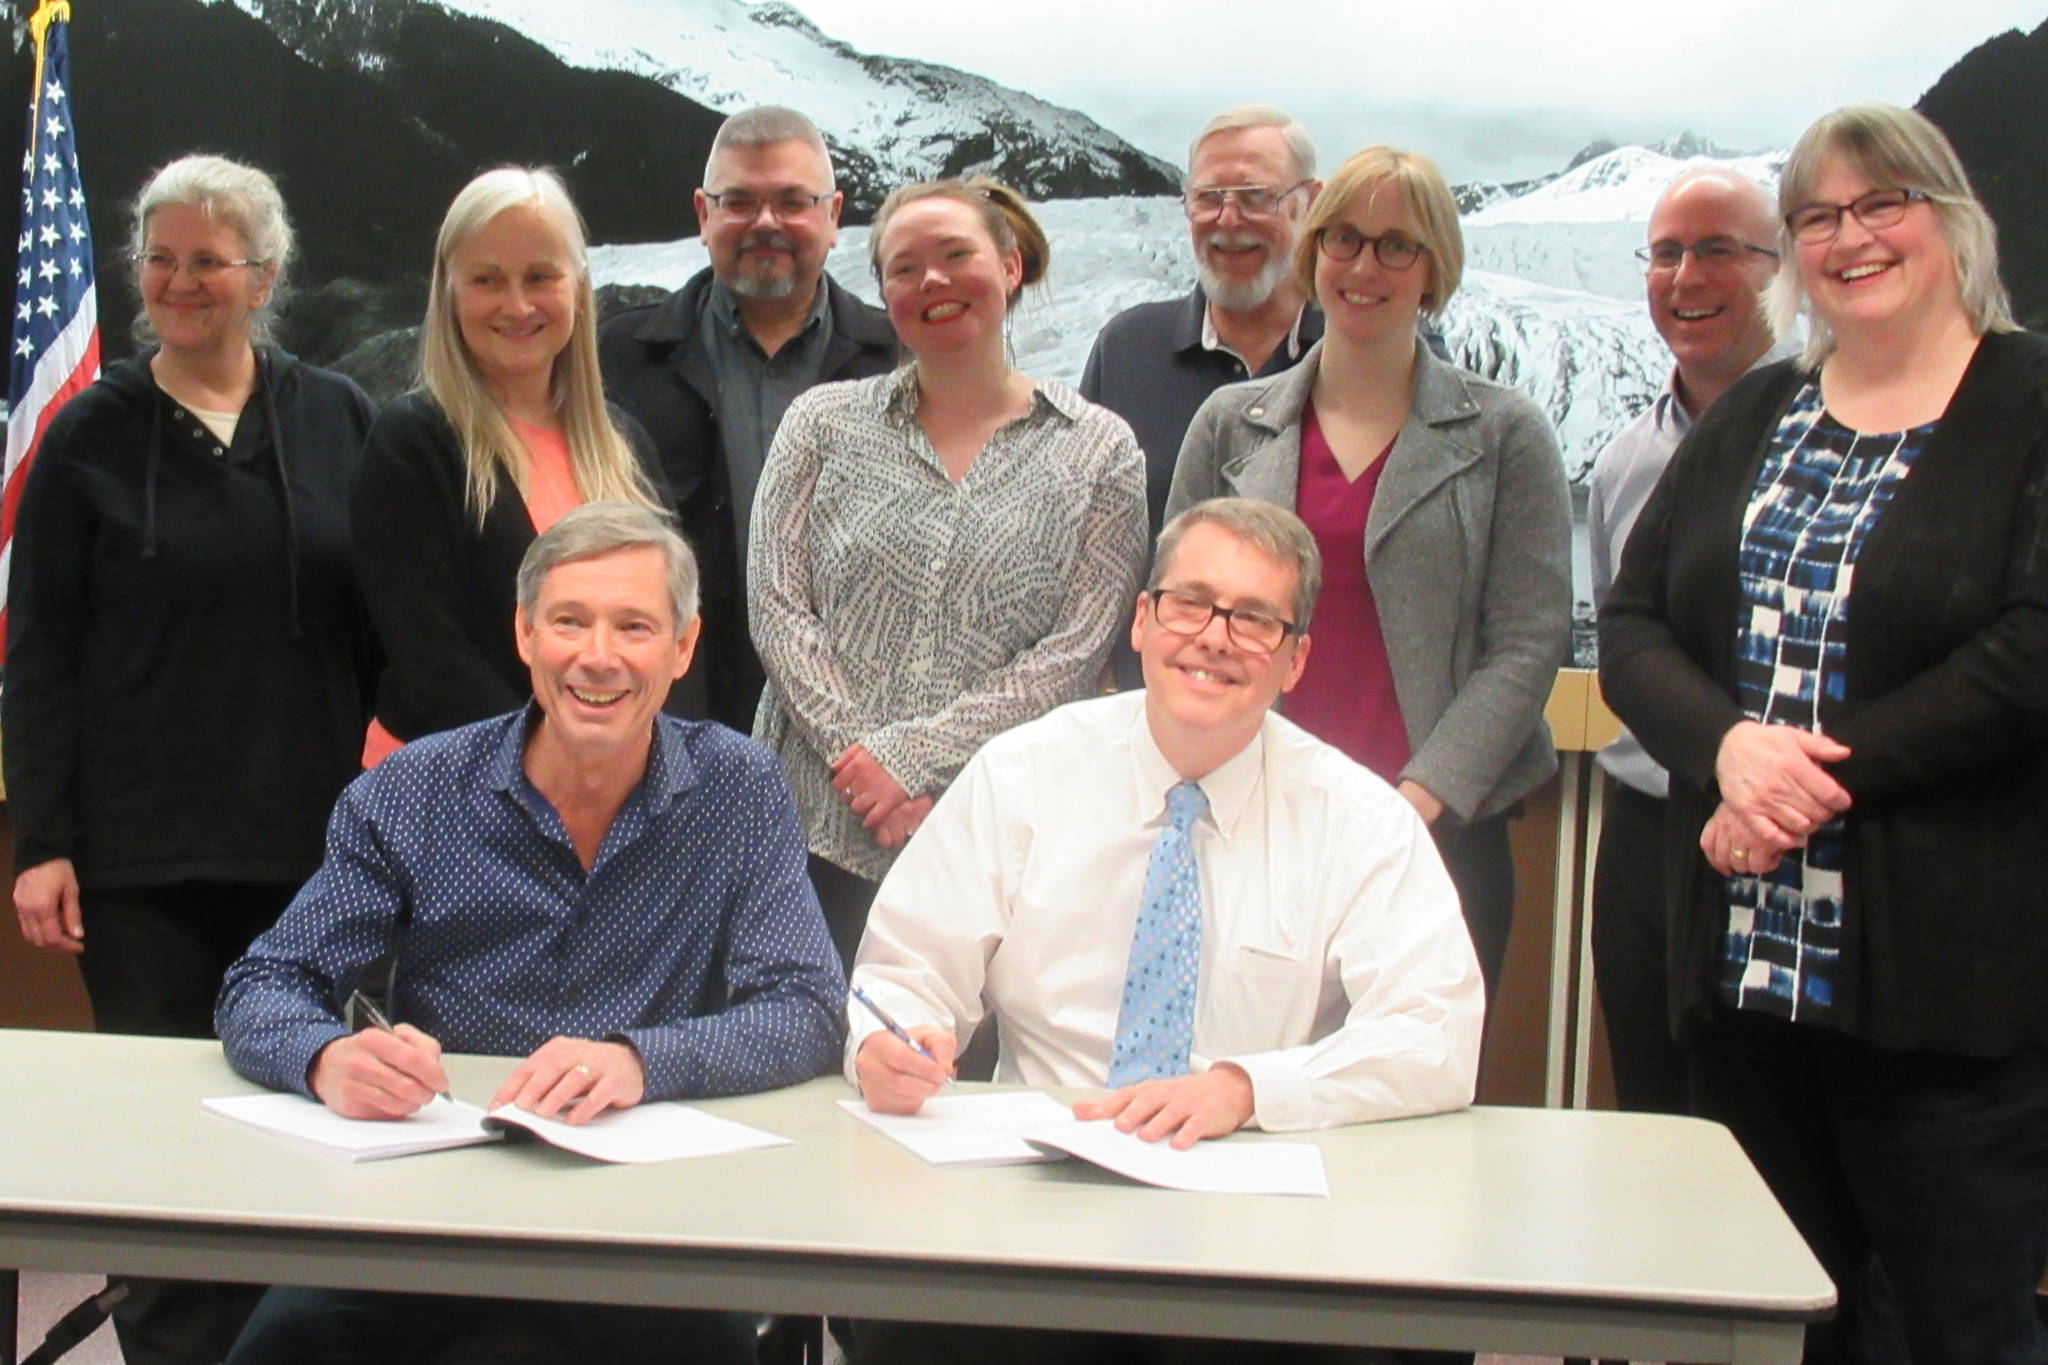 Cruise Lines International Association Alaska President John Binkley and City and Borough of Juneau City Manager Rorie Watt sign an agreement that brought litigation between CLIA and CBJ to an end Friday, March, 22, 2019. They are backed by Assembly members Michelle Bonnet Hale, Maria Gladziszewski, Rob Edwardson, Alicia Hughes-Skandijs, Loren Jones, Carole Triem, Wade Bryson and Mayor Beth Weldon.